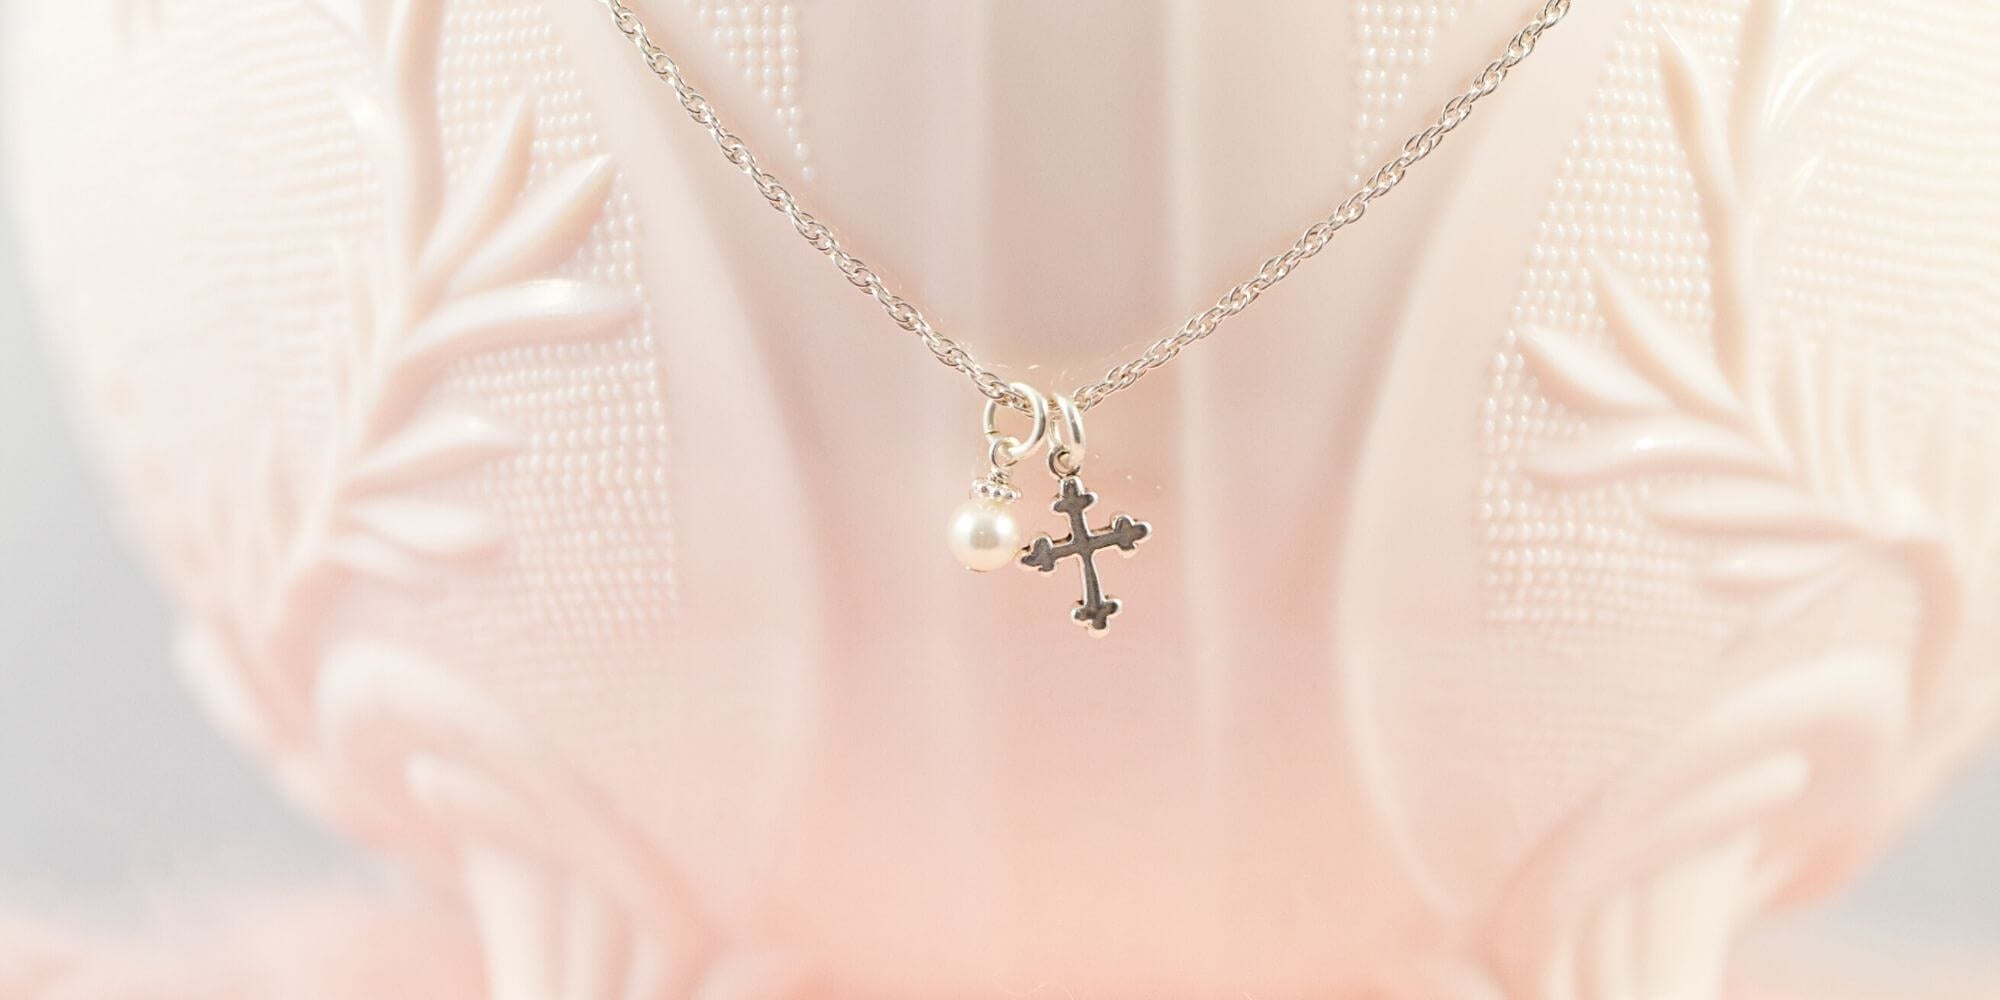 18K Small Diamond Cross Necklace for Baby Girl, Baptism Gift for Girl, Gold  Filled Cross Chain, Waterproof Jewelry, Religious Gift for Her - Etsy